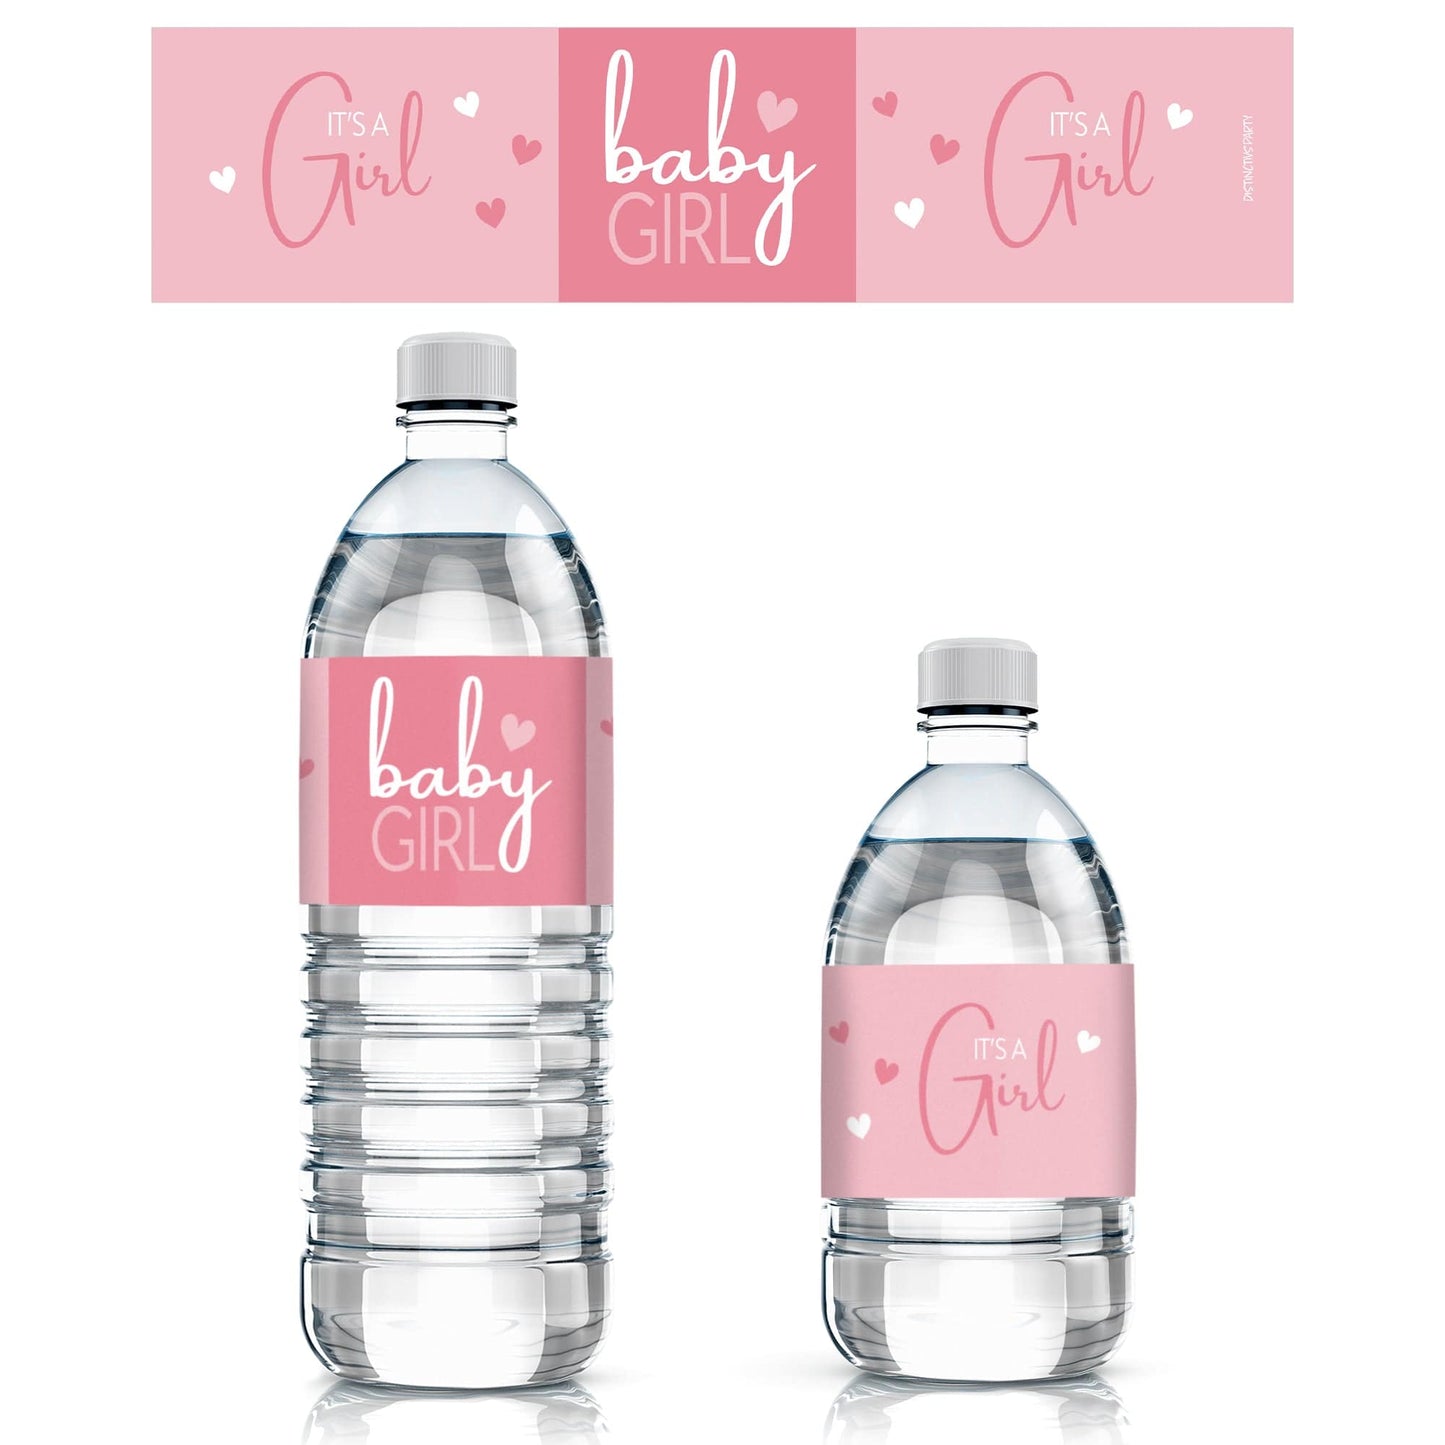 24 Pink It's a Girl water bottle labels for a baby shower celebration